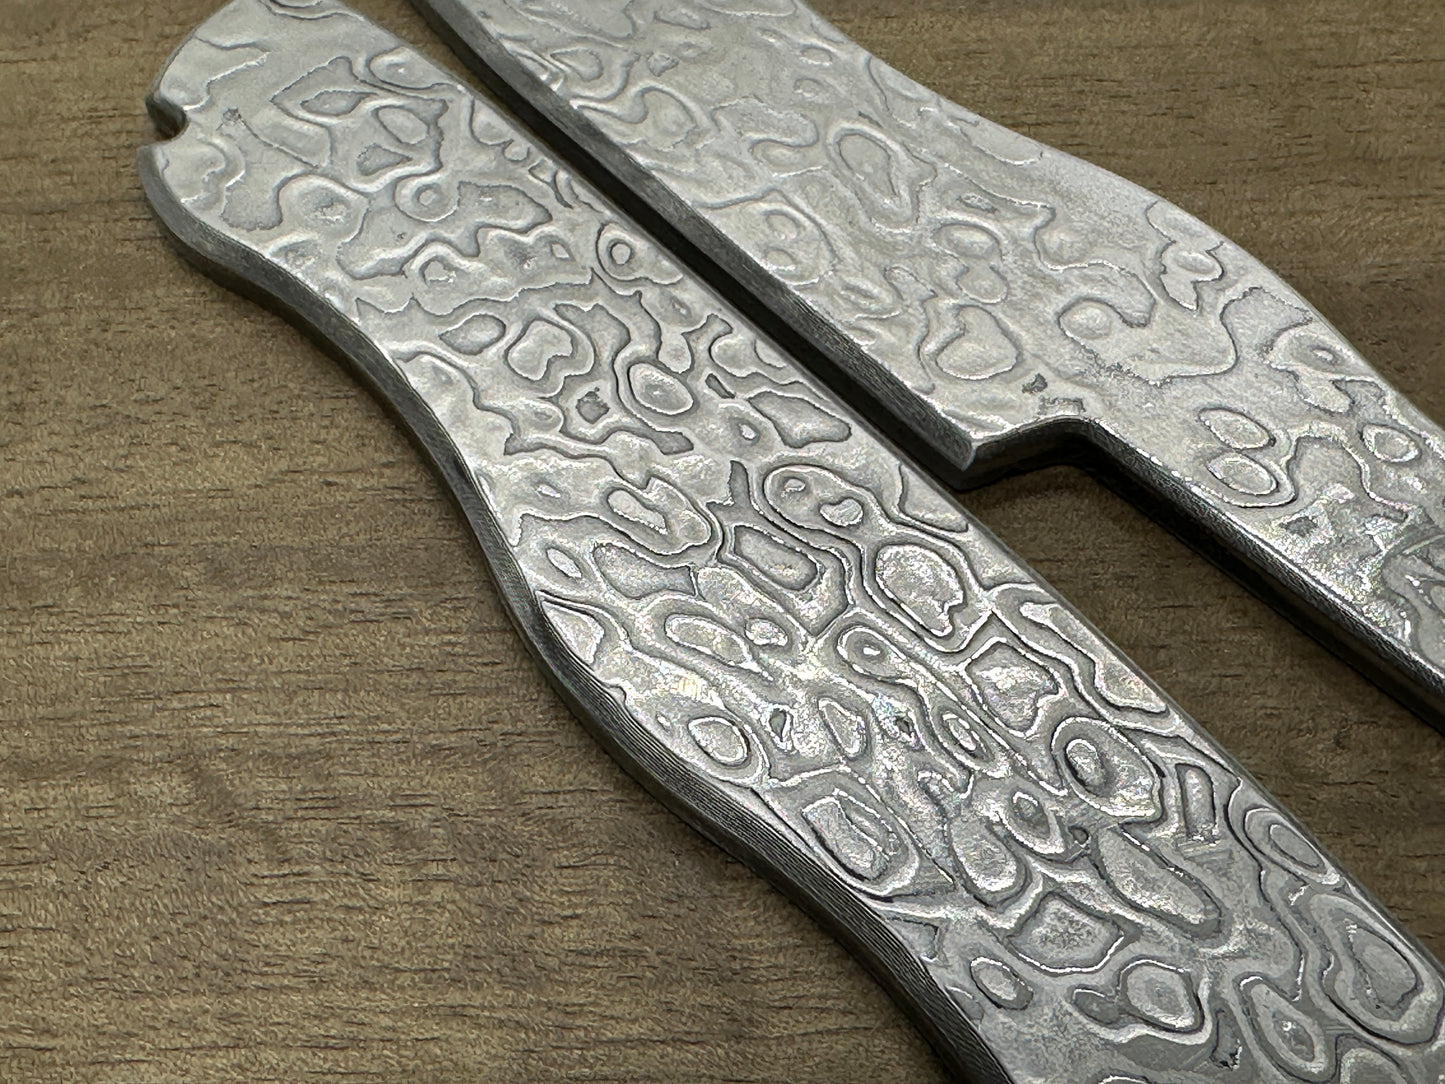 111mm Damascus Steel Scales - Stainless - Pen/Needle Cutouts for Swiss Army SAK